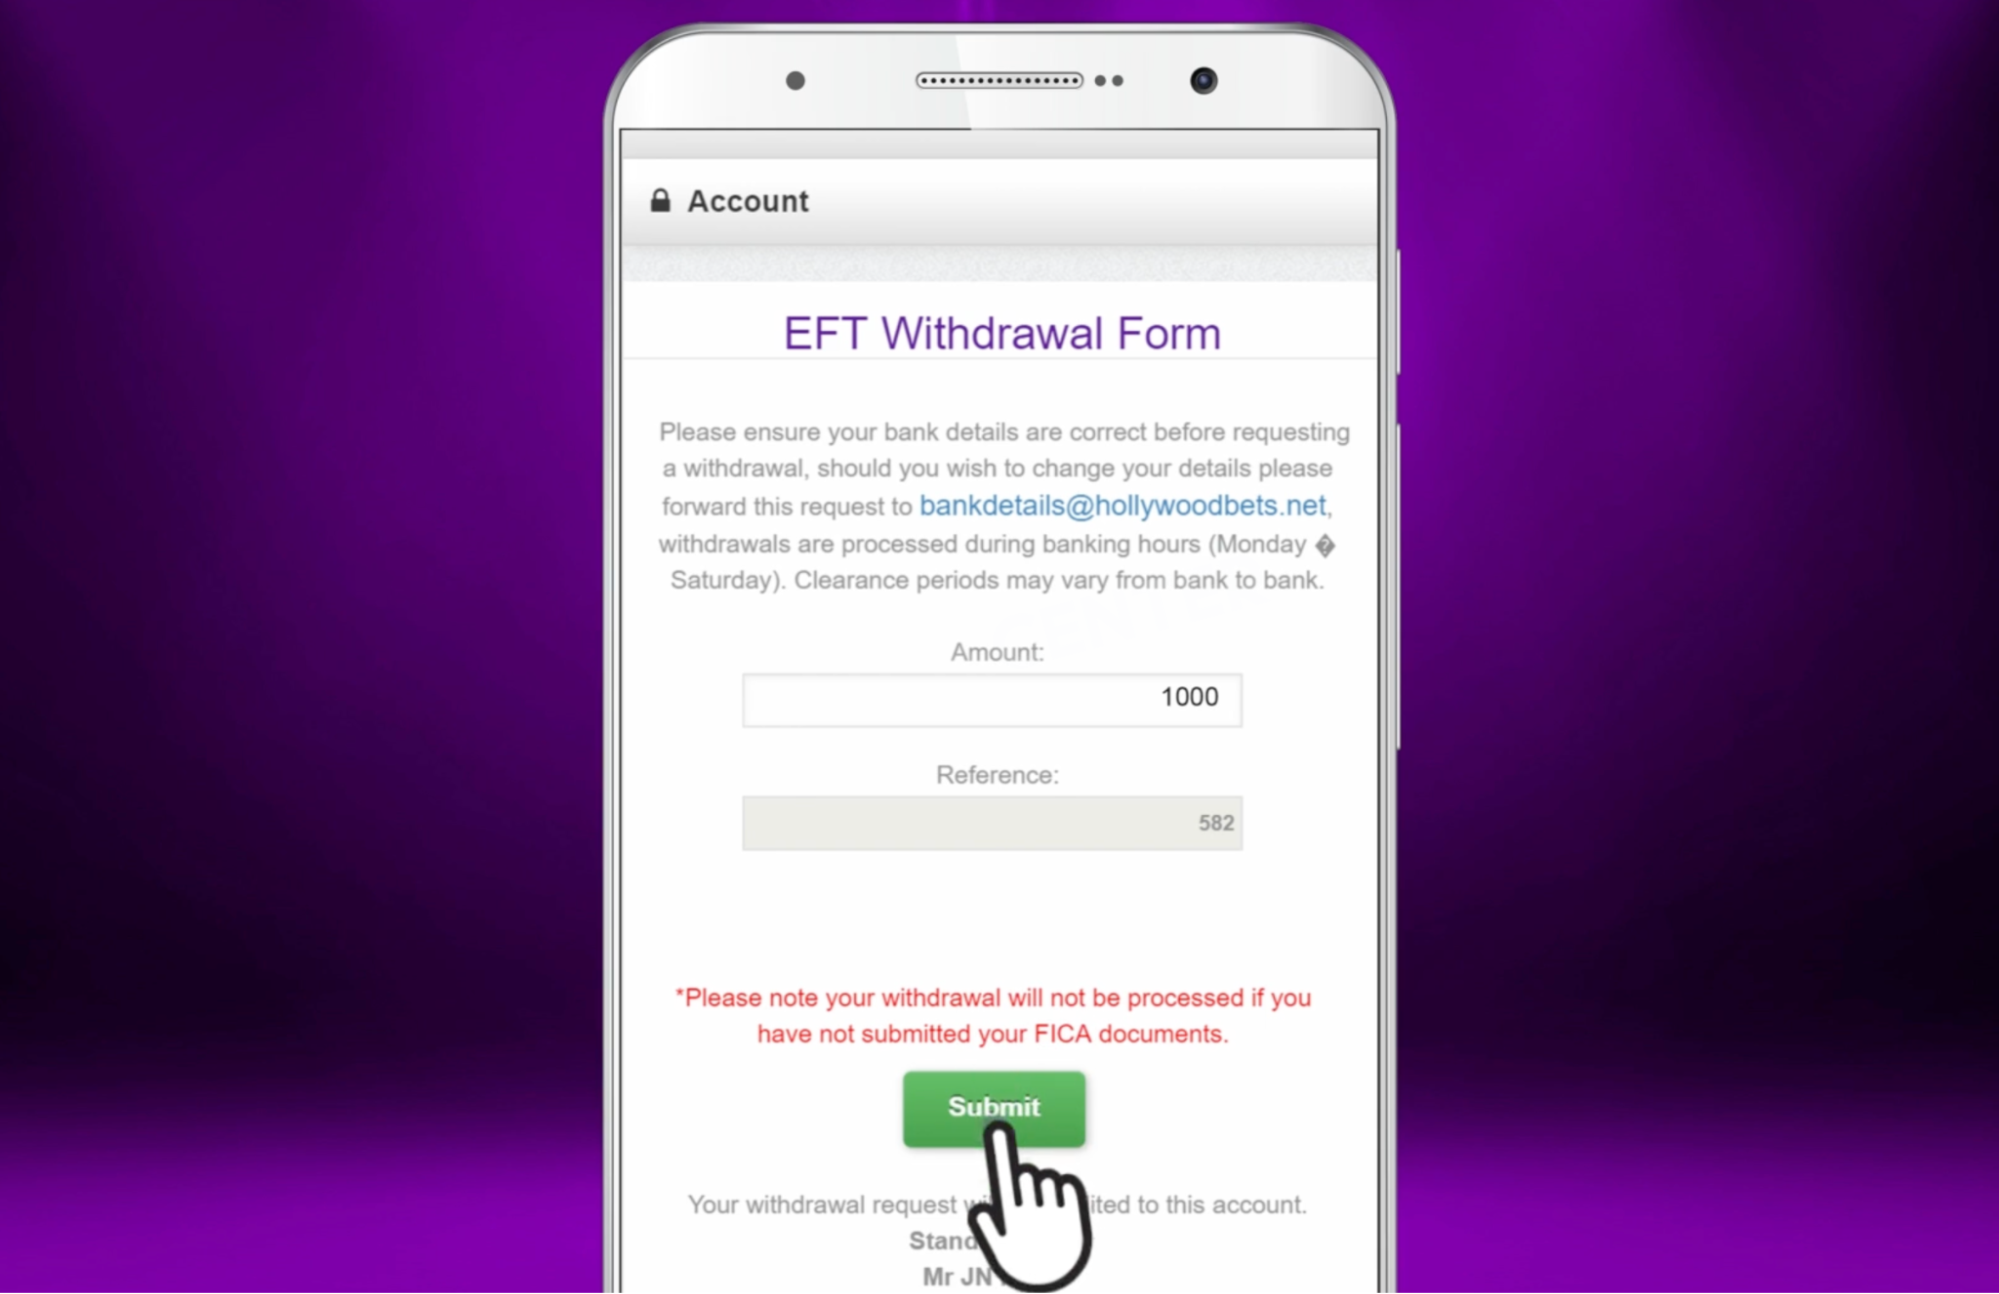 EFT withdrawals at Hollywoodbets